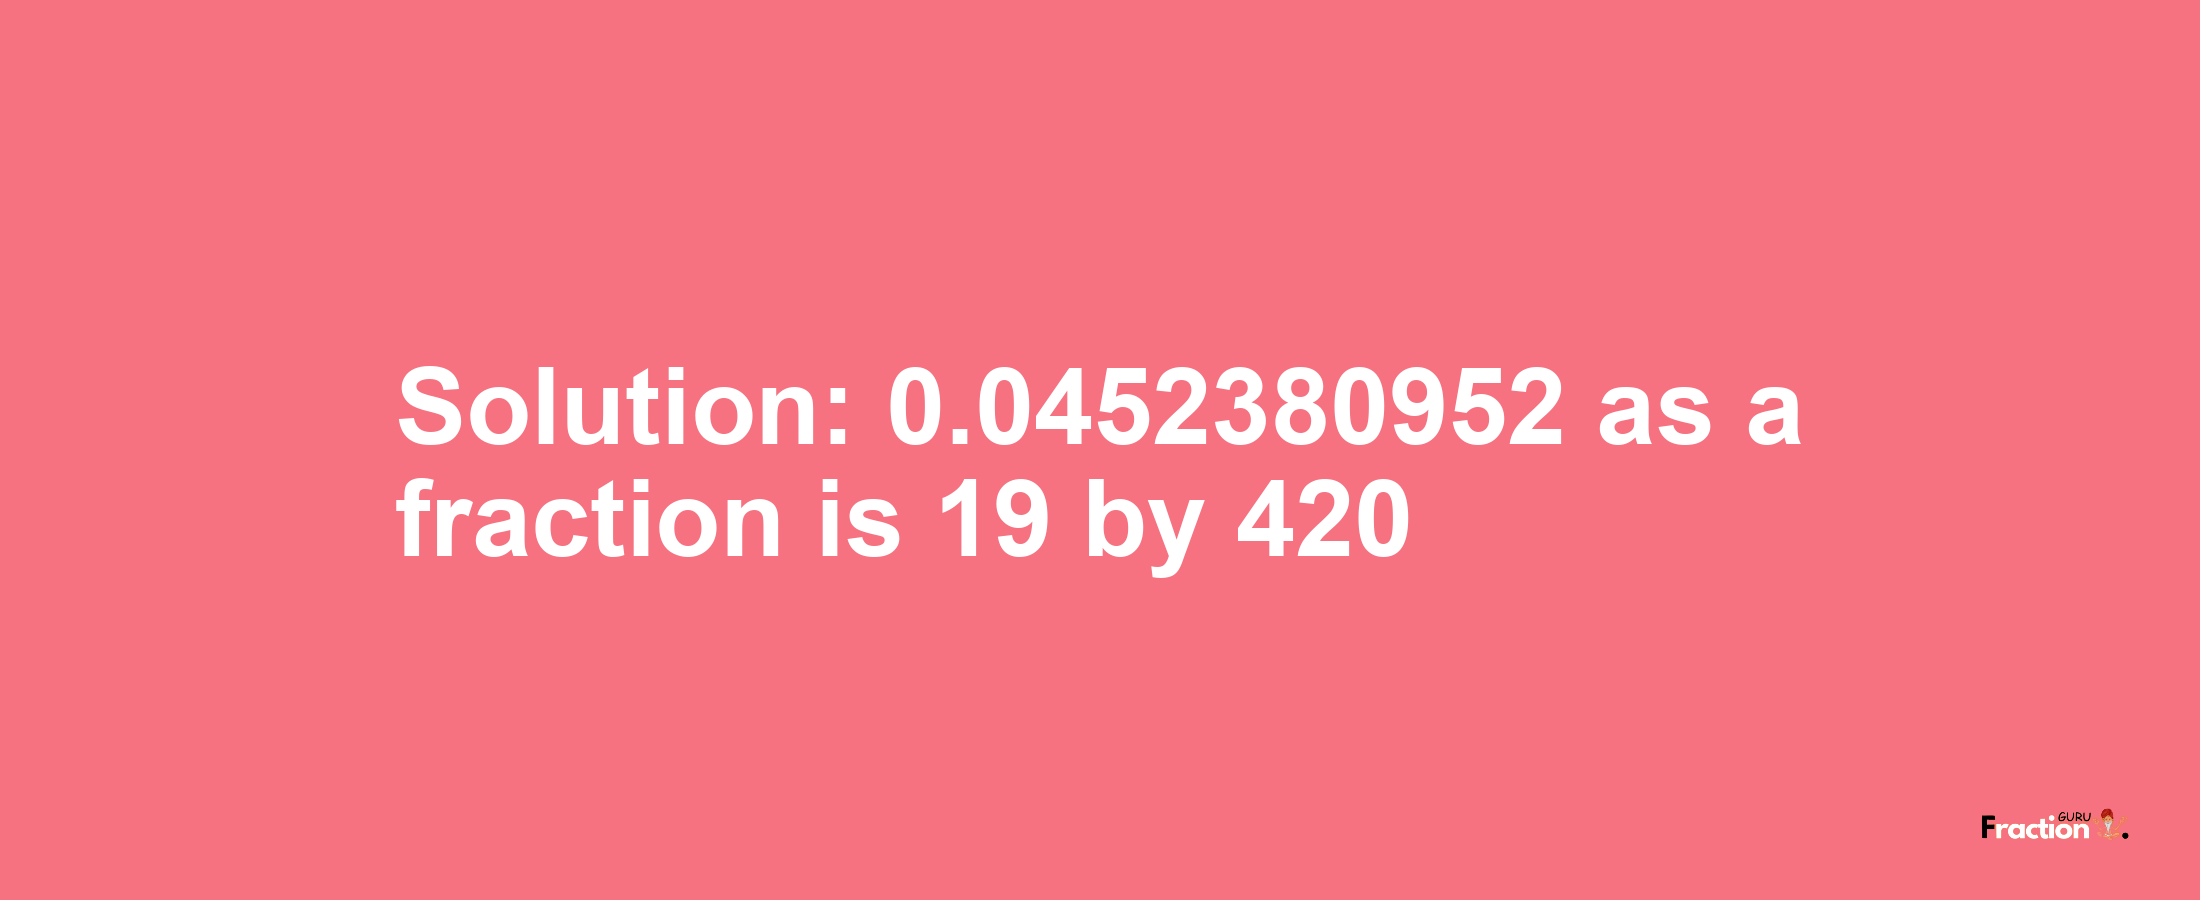 Solution:0.0452380952 as a fraction is 19/420